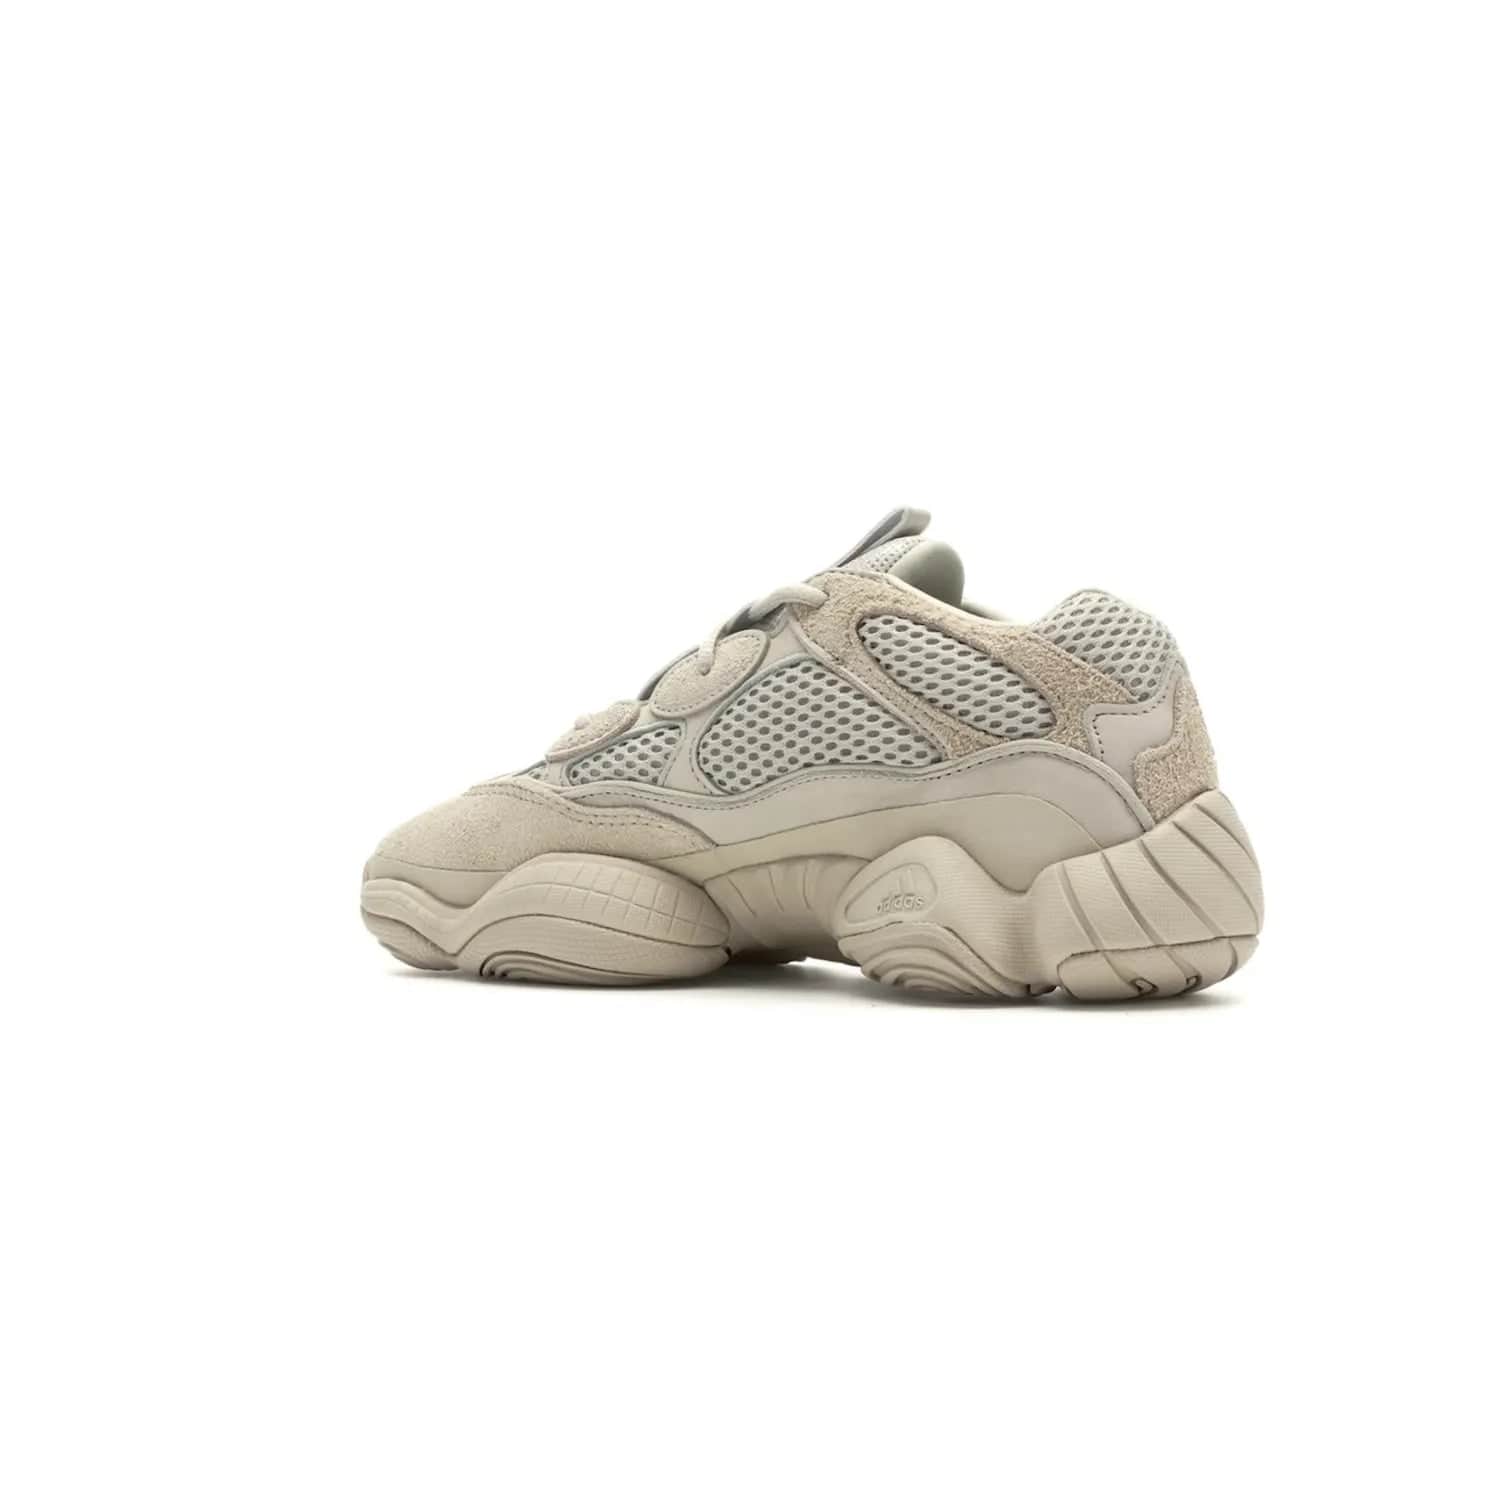 adidas Yeezy 500 Blush - Image 22 - Only at www.BallersClubKickz.com - Step up your sneaker game with the Adidas Yeezy 500 Blush. Monochromatic pale pink palette, hiking-inspired suede/mesh construction, plus adiPRENE sole for comfort and performance. Get the Adidas Yeezy 500 and experience true style and comfort.